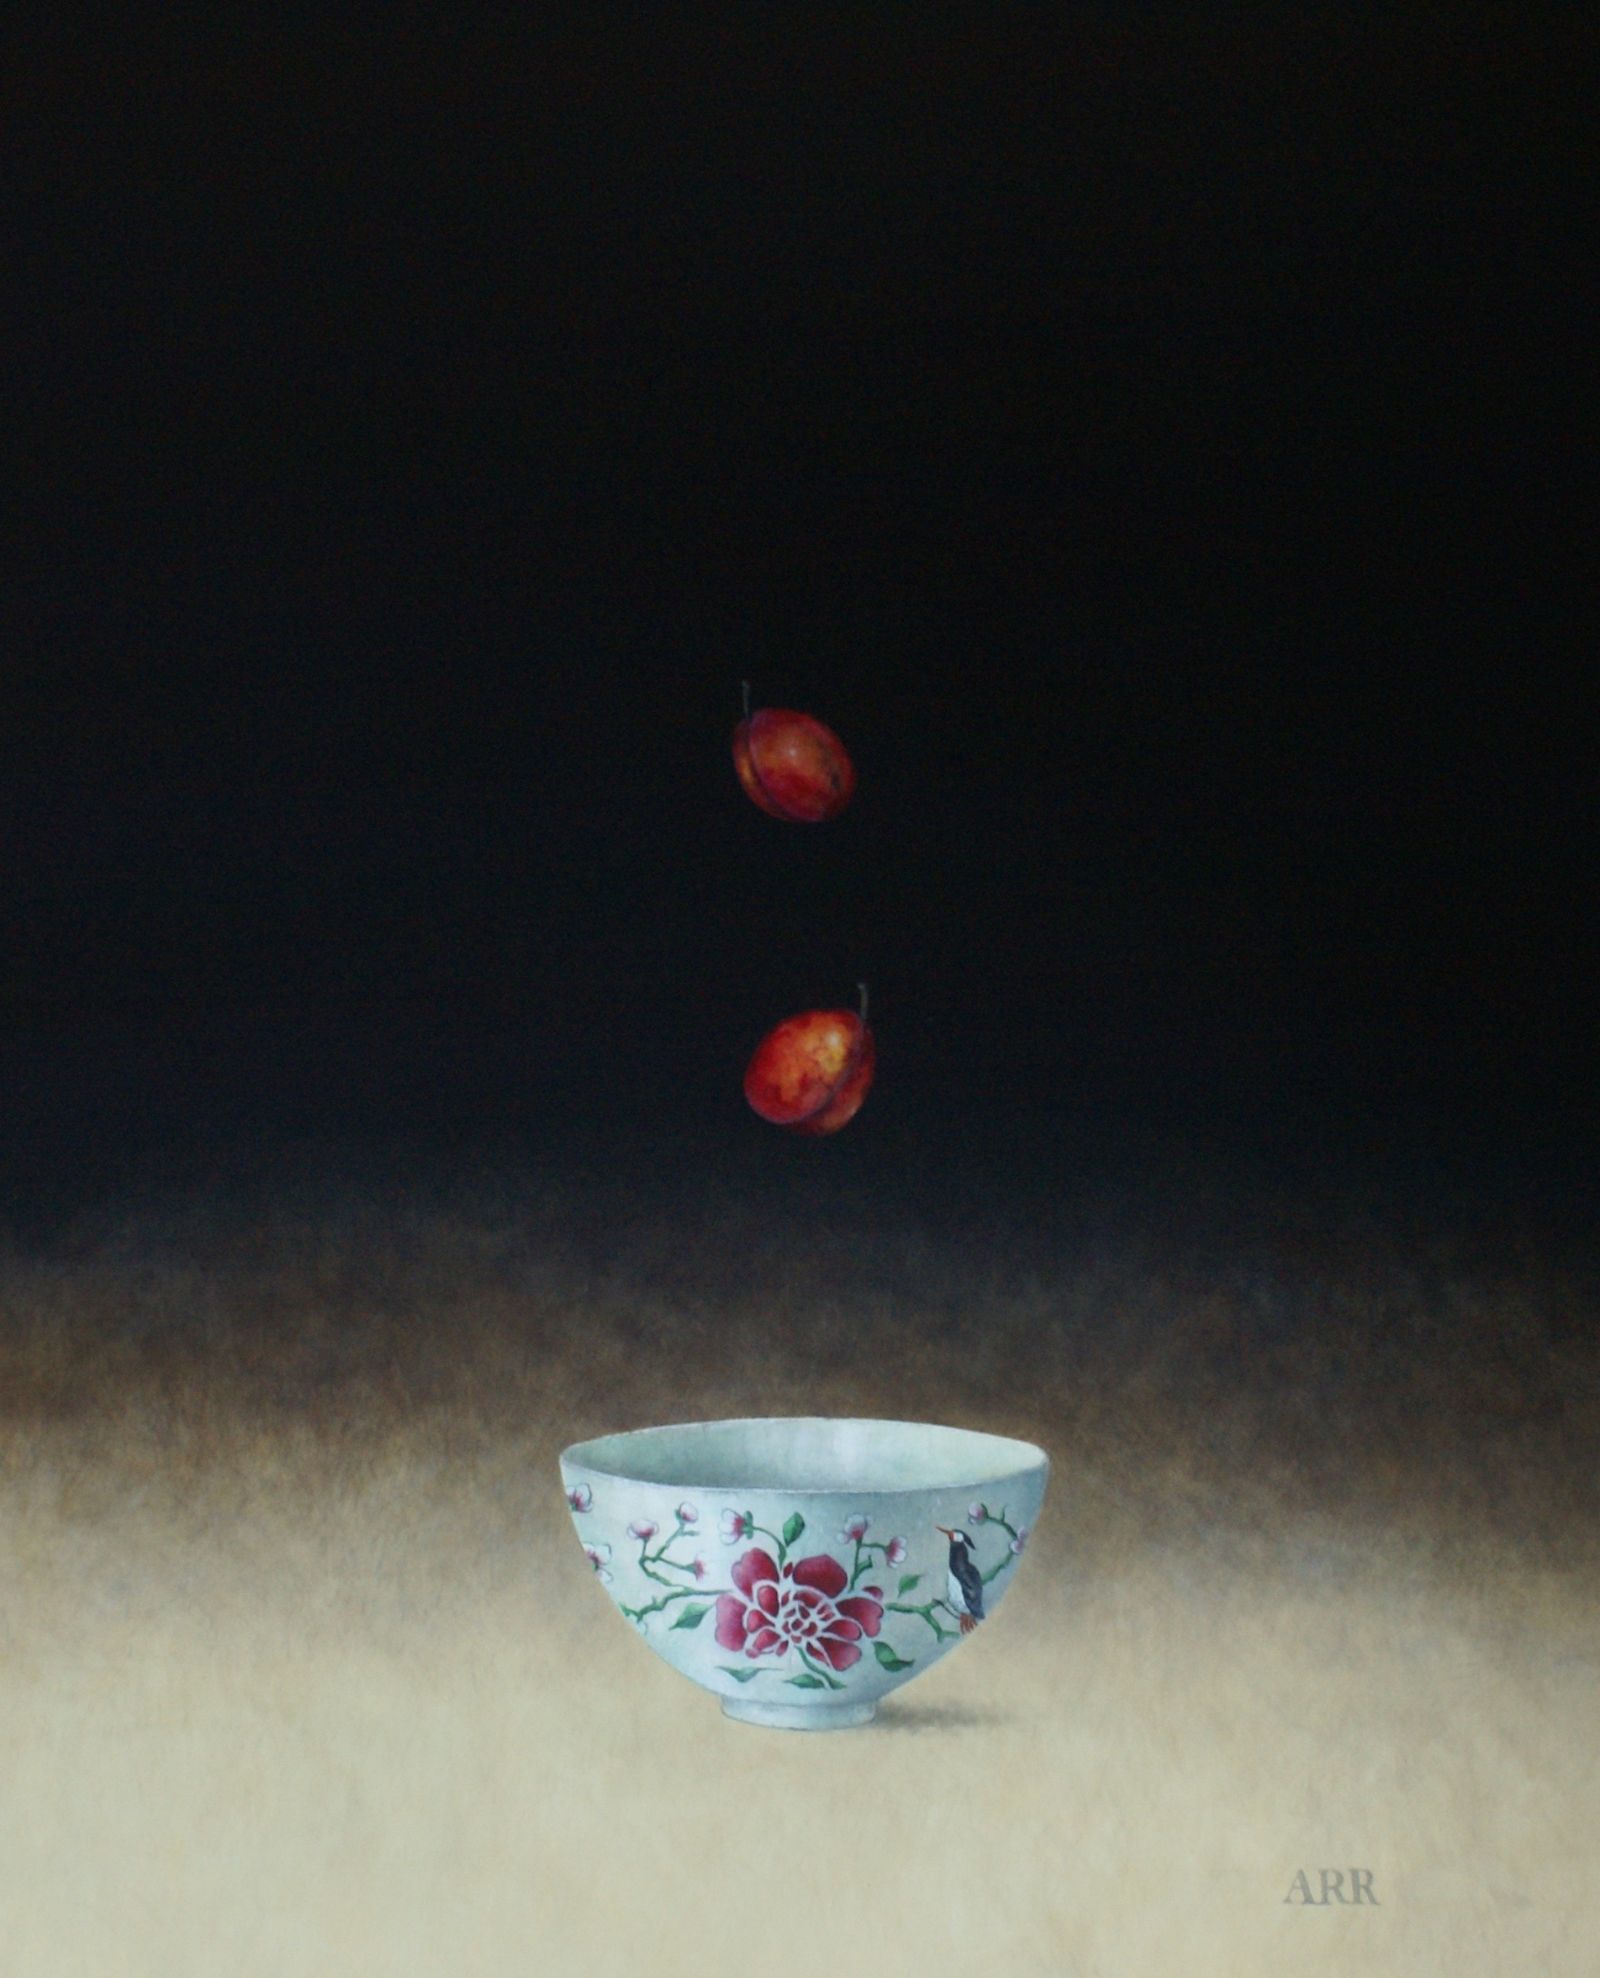 Rose Bowl and Two Falling Plums by Alison Rankin